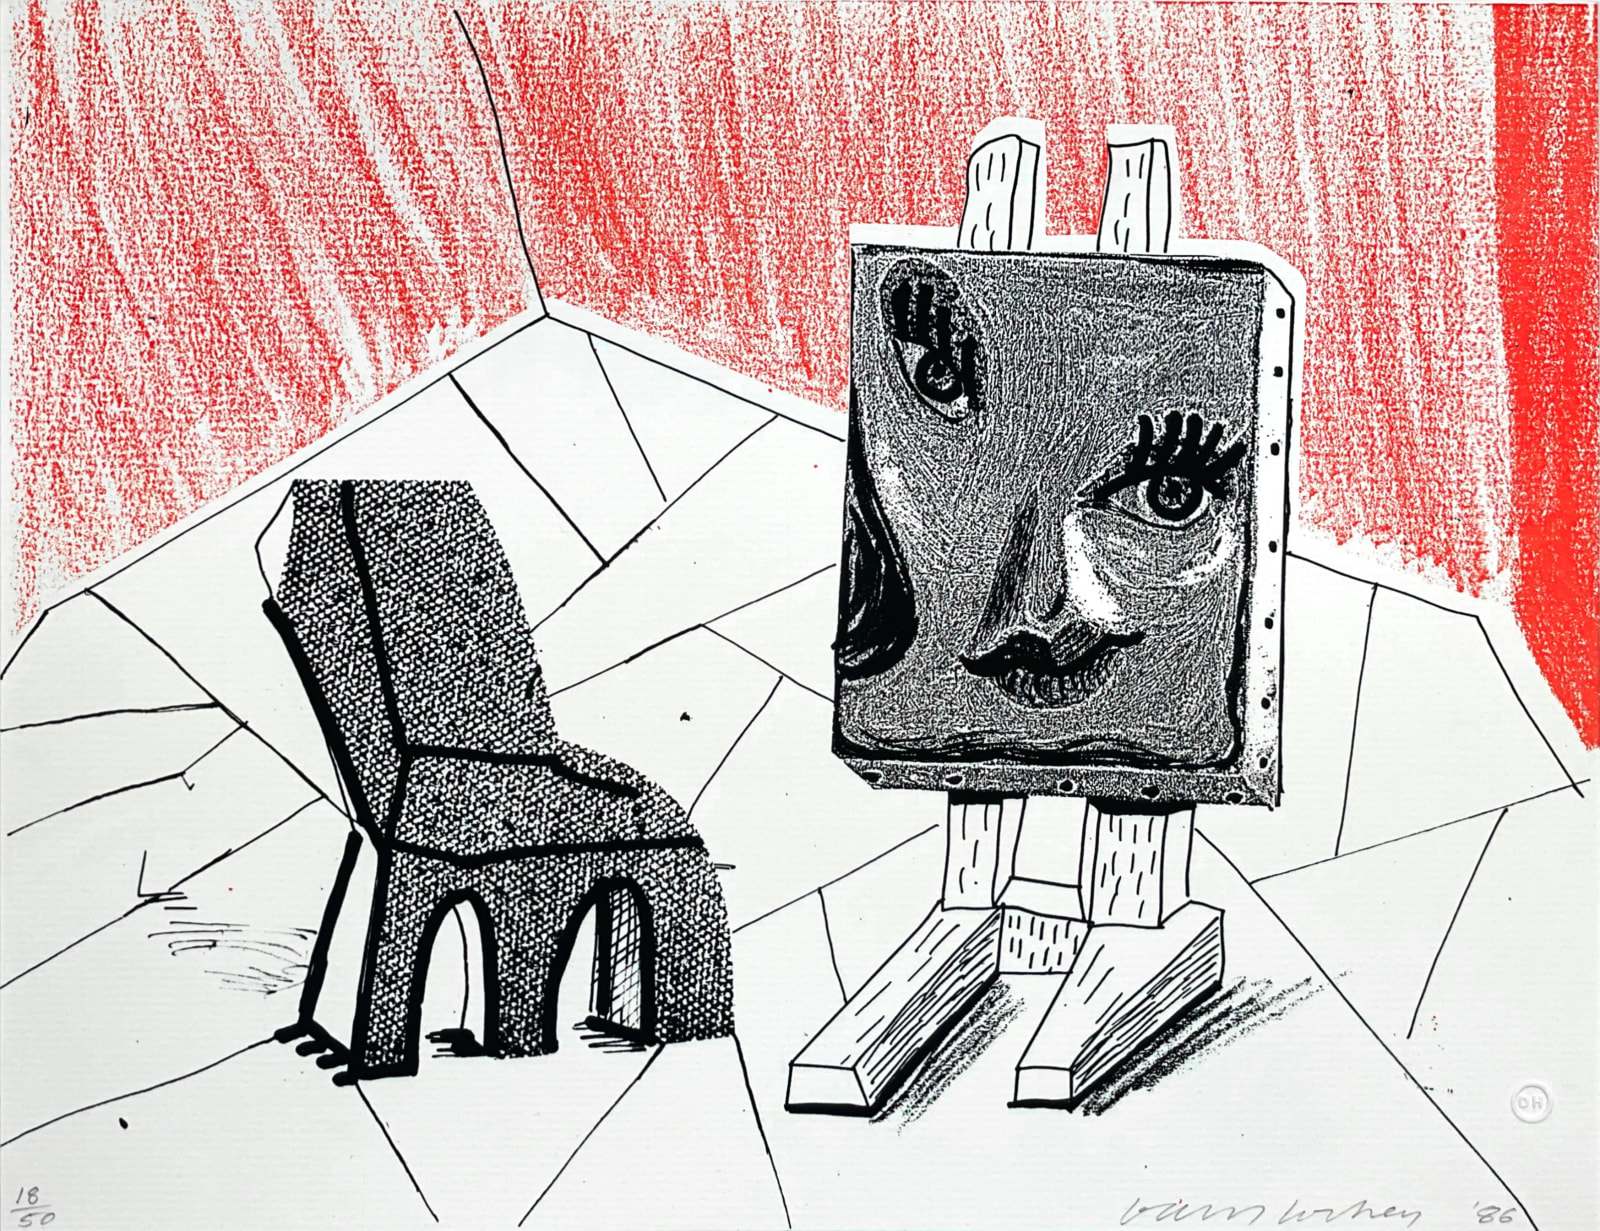 David Hockney, Celia with Chair, March 1986, 1986